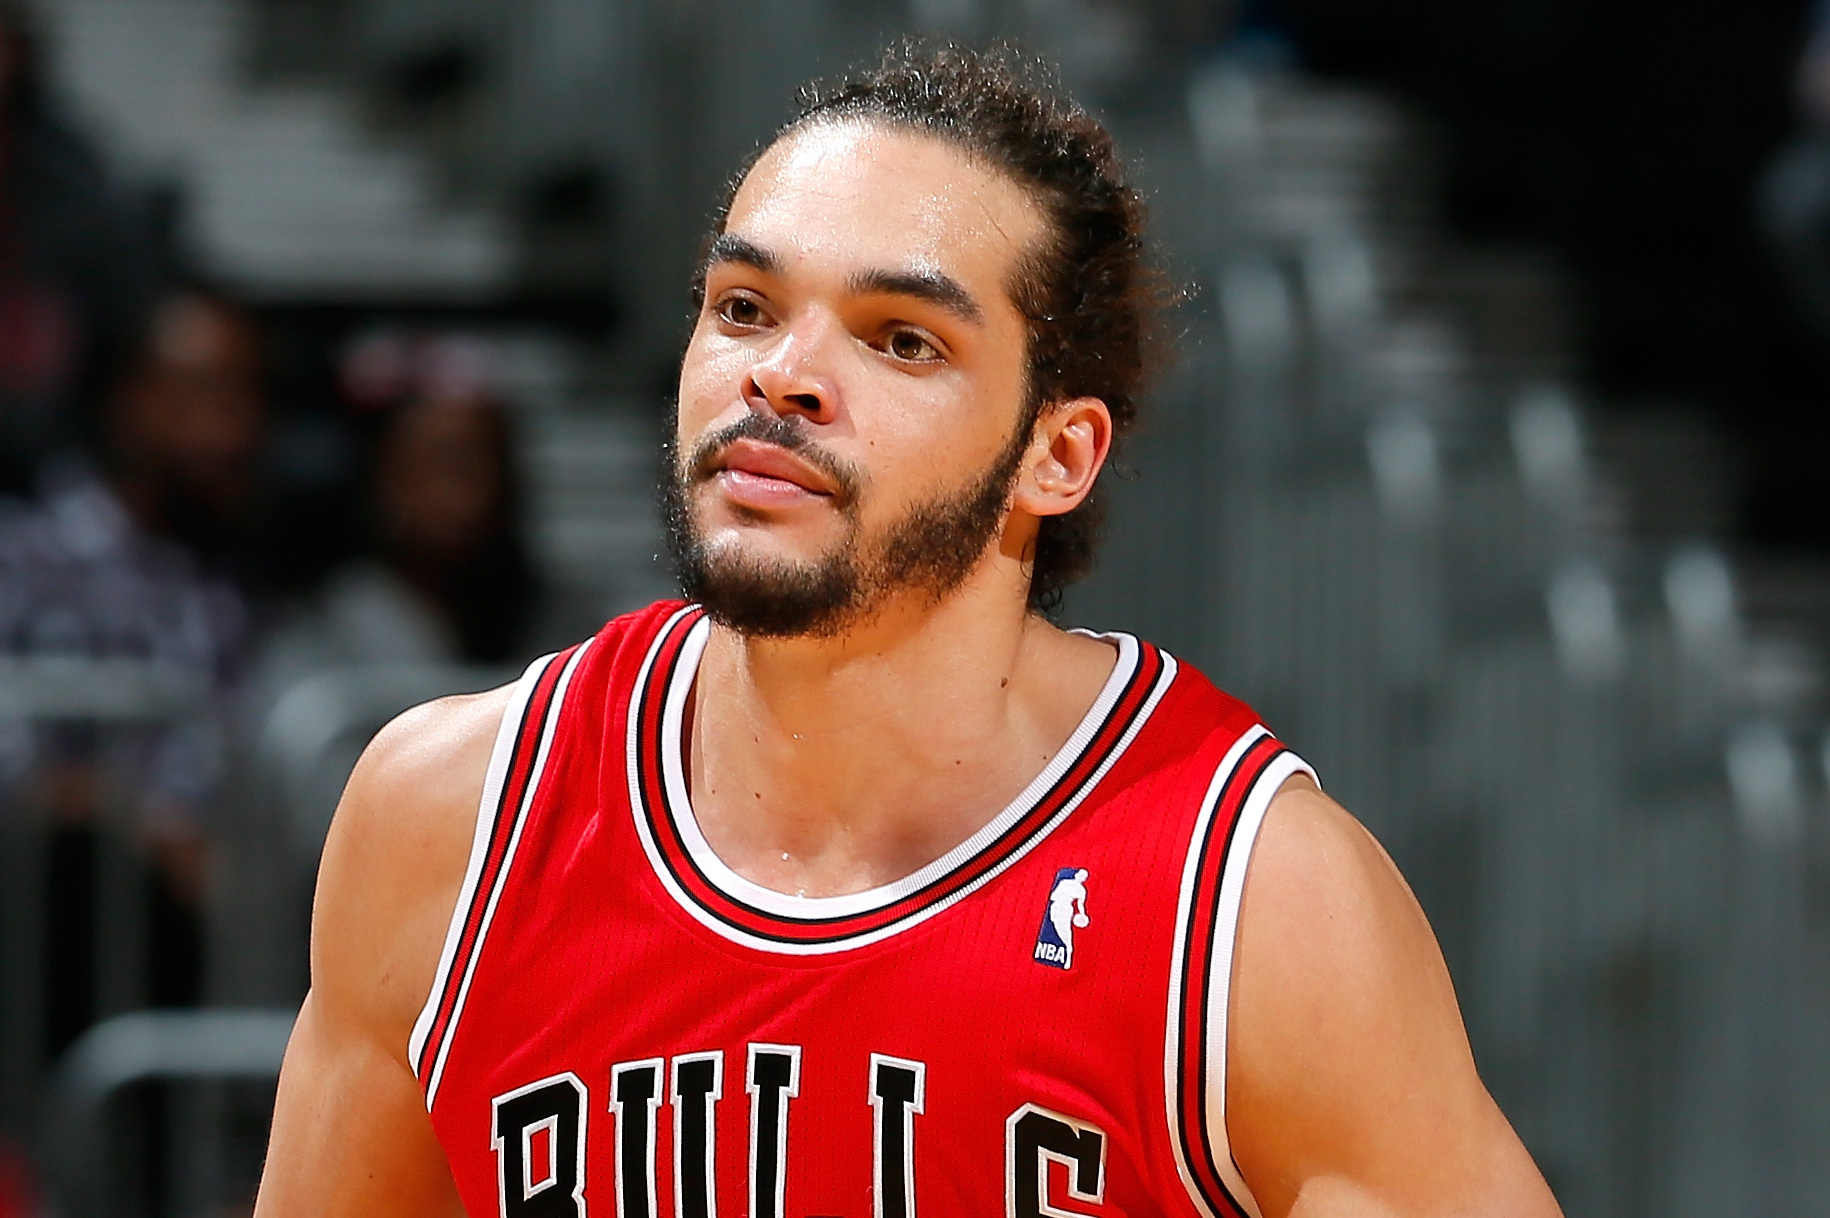 No shortcuts: All-Star Joakim Noah's passion leads to success on